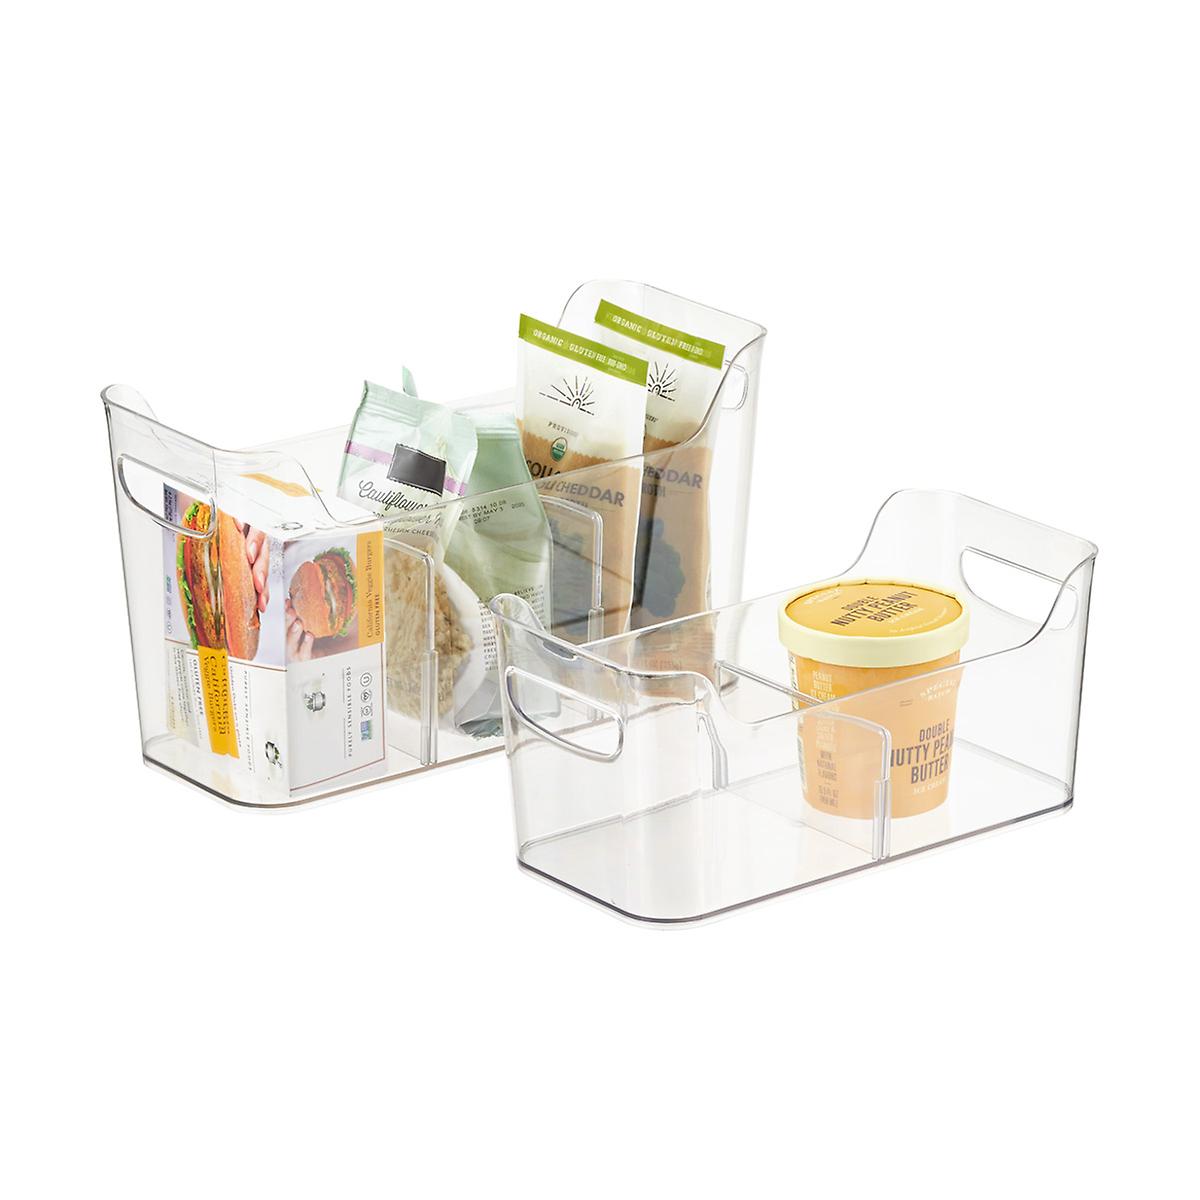 10 Clear Fridge Organizers To Help You Stop Wasting Food